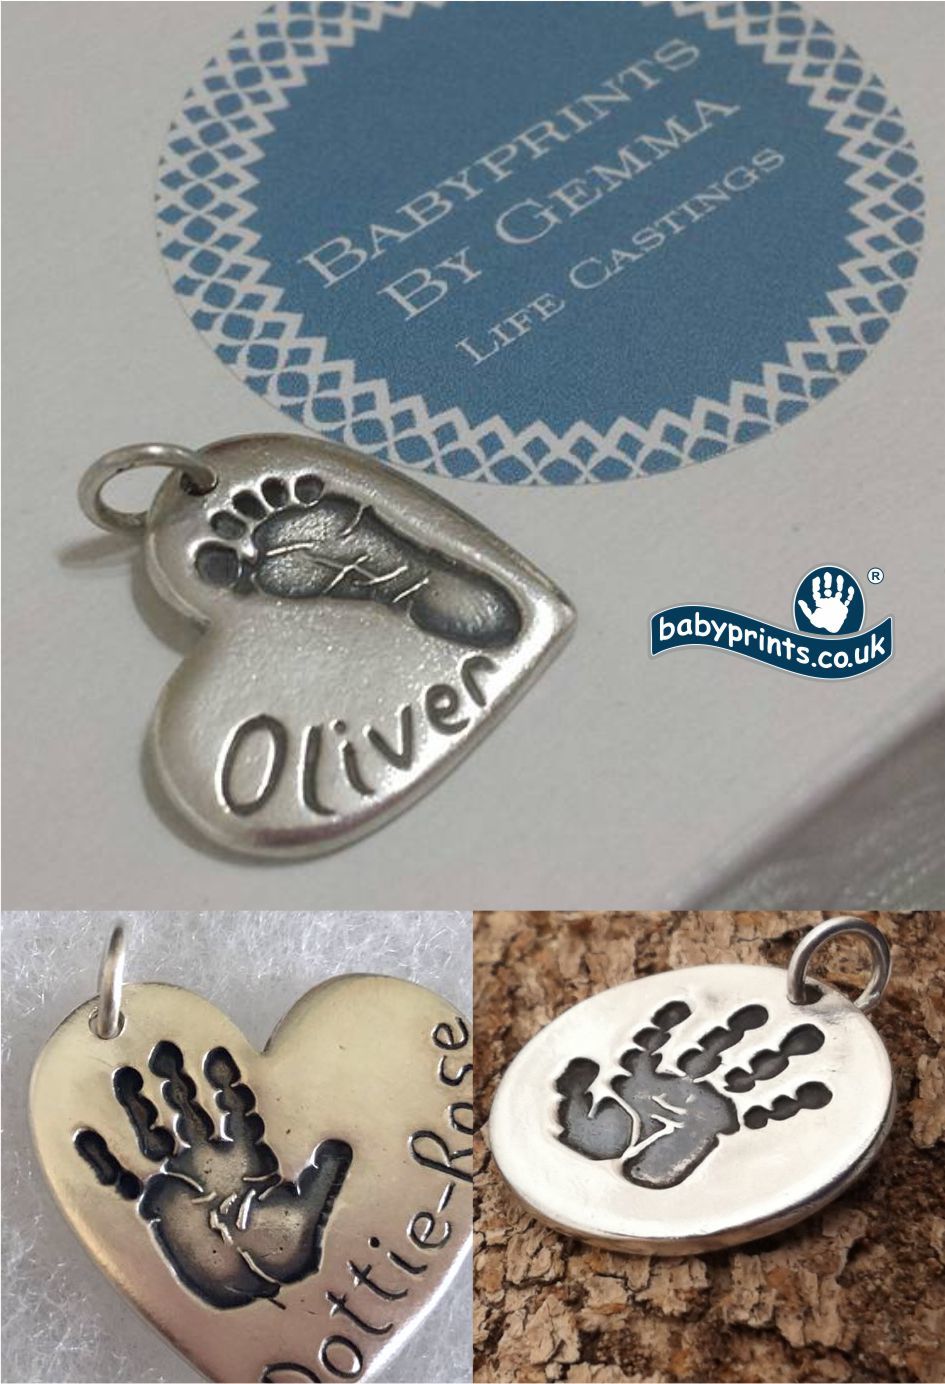 Hand and foot prints on jewellery